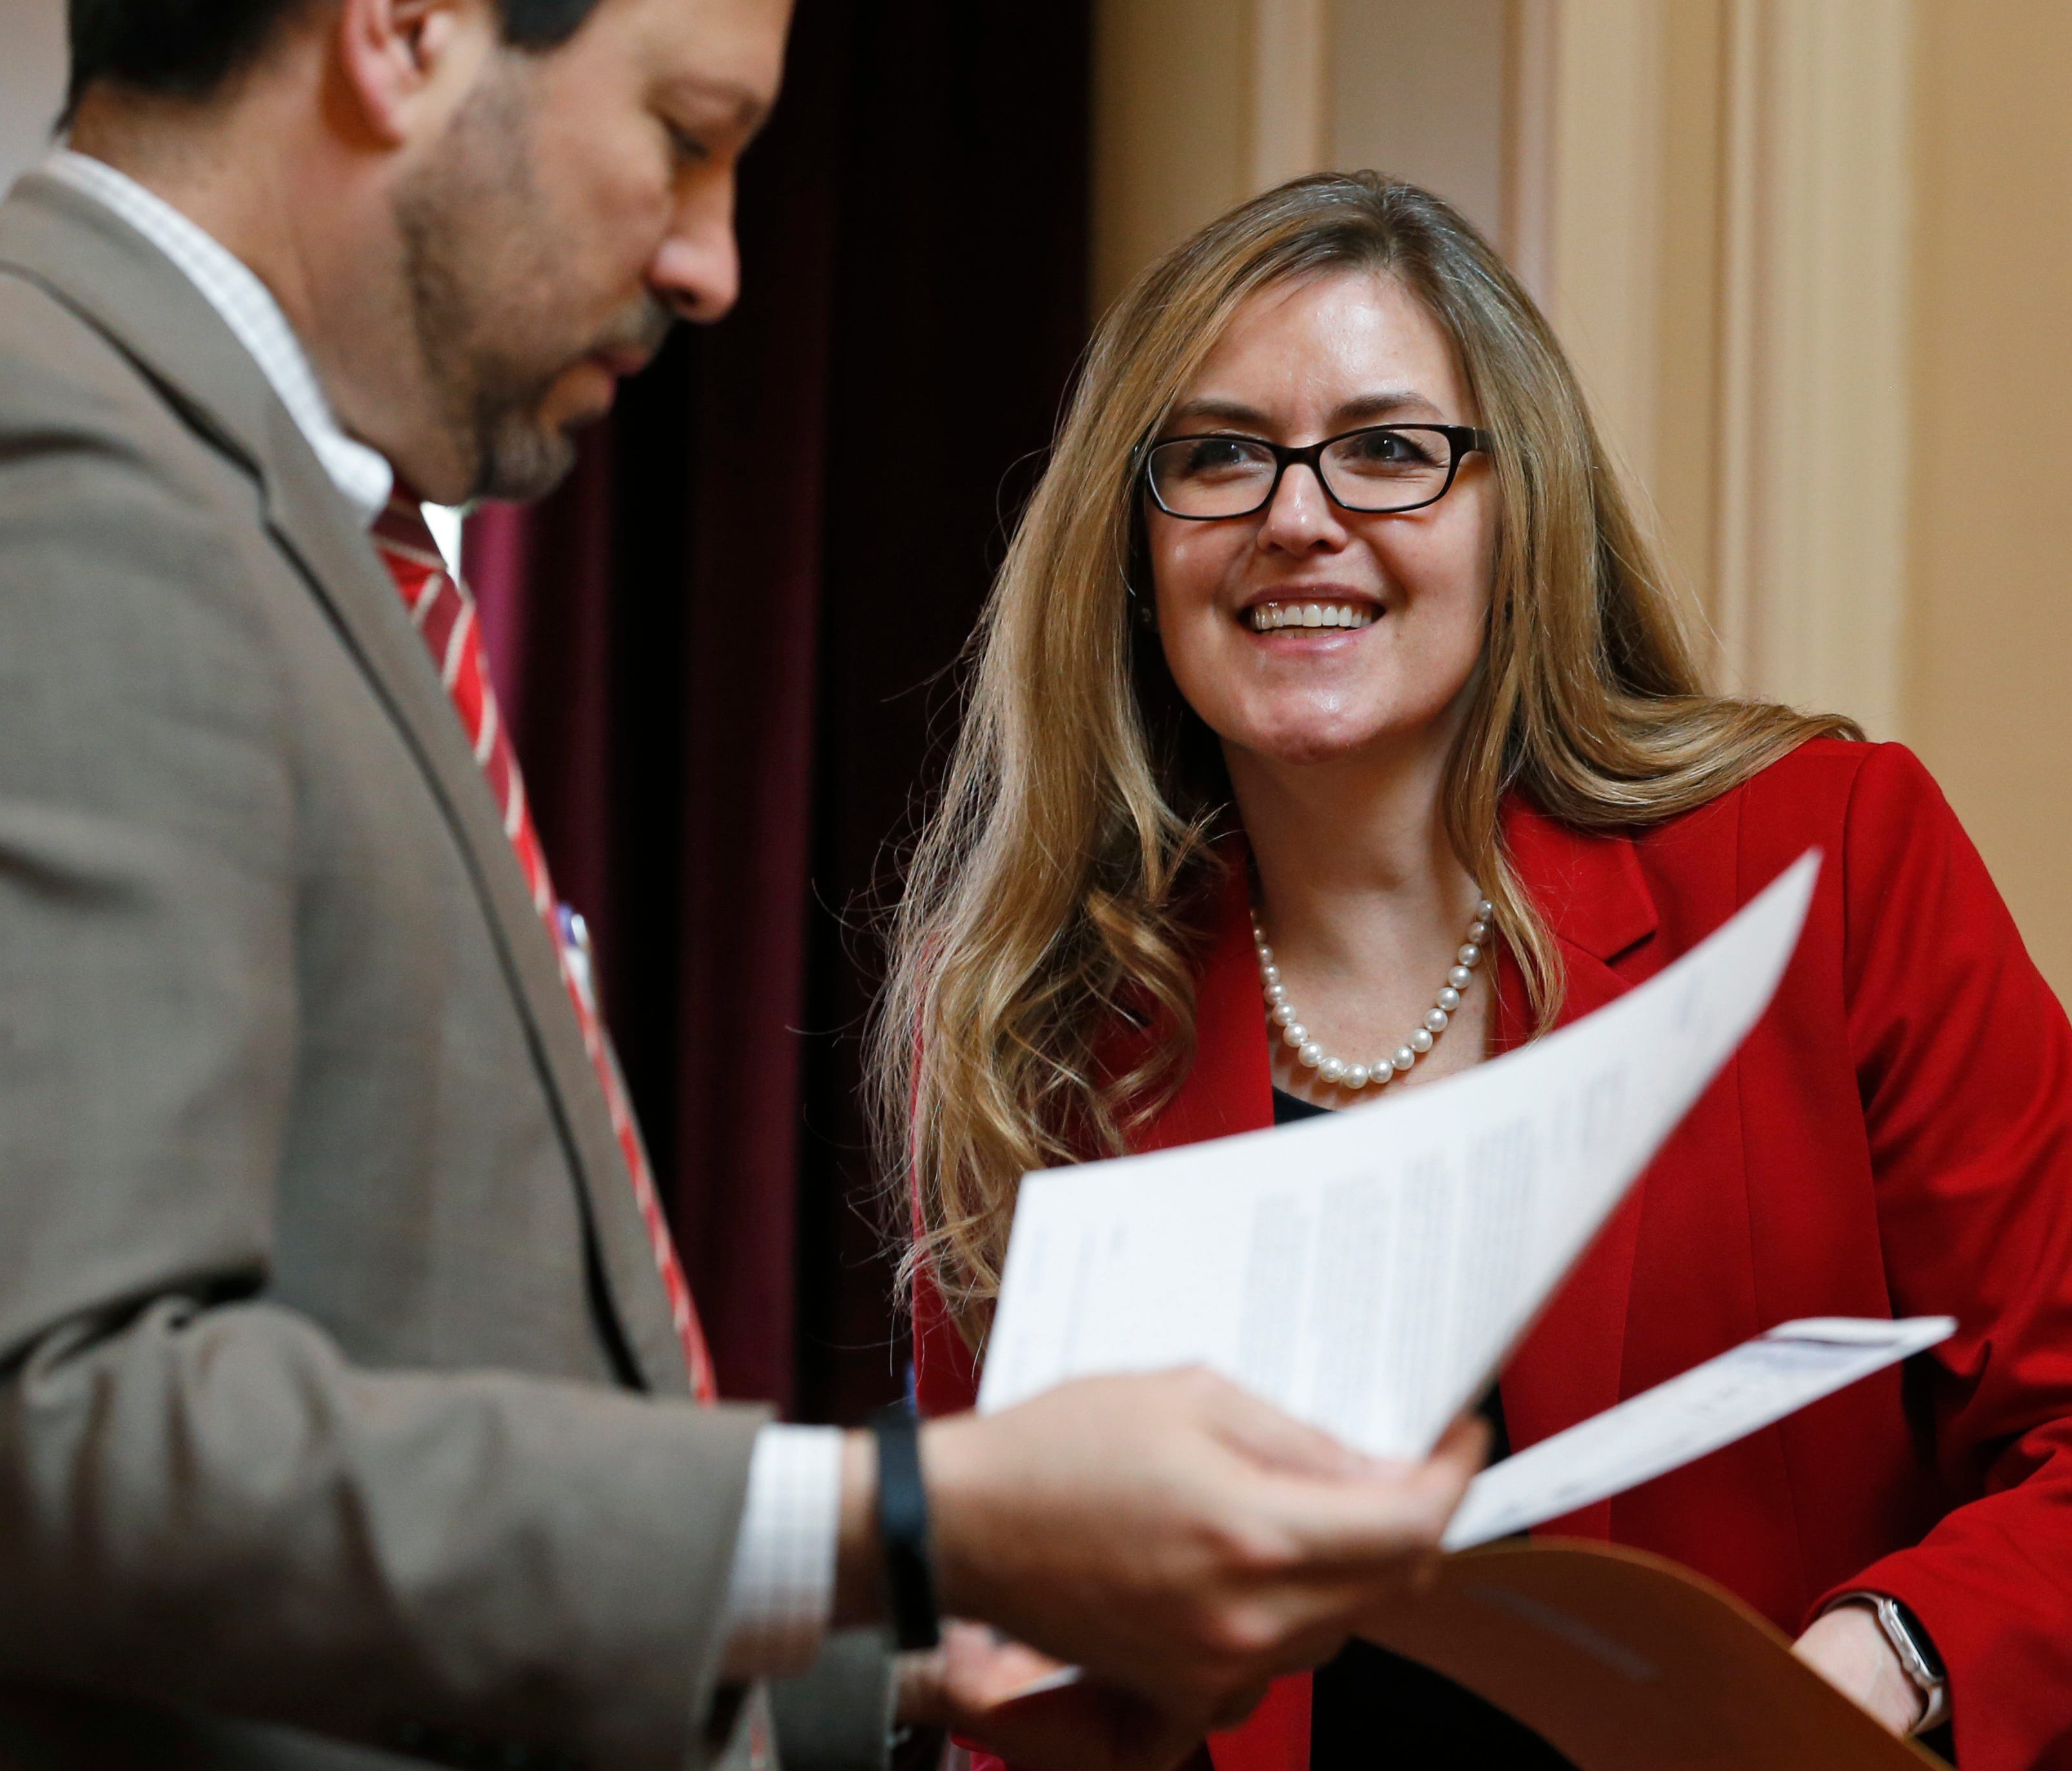 In this Wednesday, April 11, 2018 photo, Virginia State Sen. Jennifer Wexton, D-Loudon, center, talks with Sen. Scott Surovell, D-Fairfax, left, during the Senate special budget session at the Capitol in Richmond, Va. Wexton is one of the candidates 